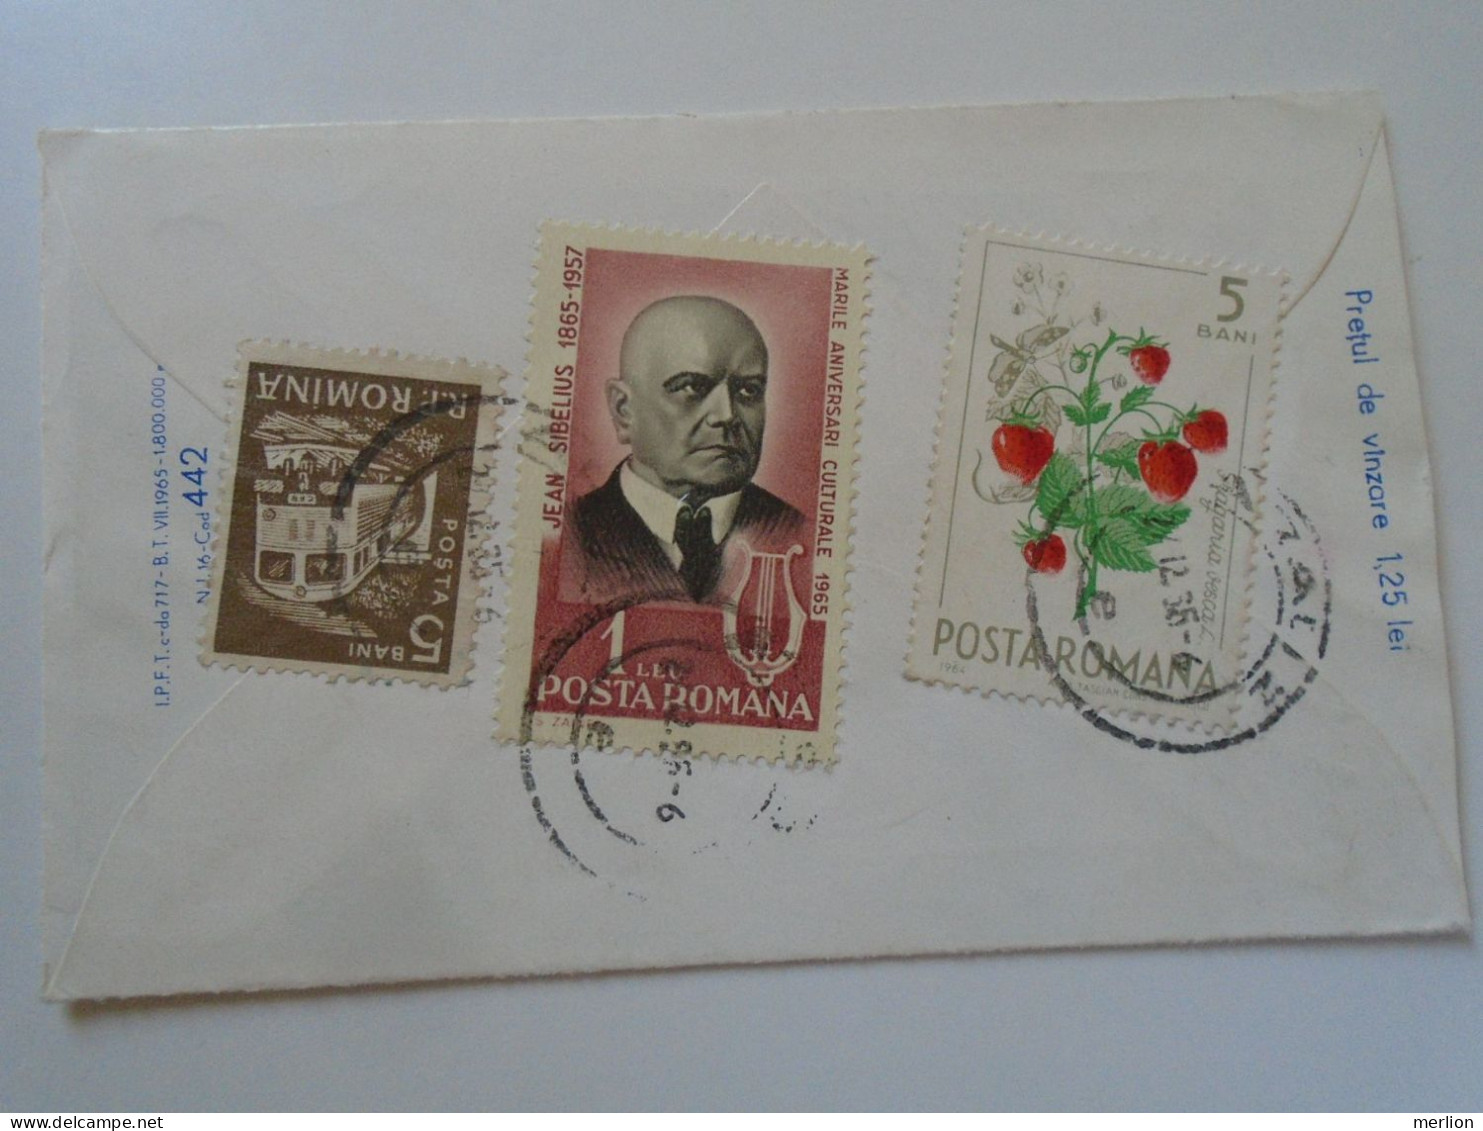 D197929 Romania Small Stationery Lilliput  Cover  Arad 1965  Sent To Hungary  Brenner Éva   Stamp  Train Berry Sibelius - Covers & Documents